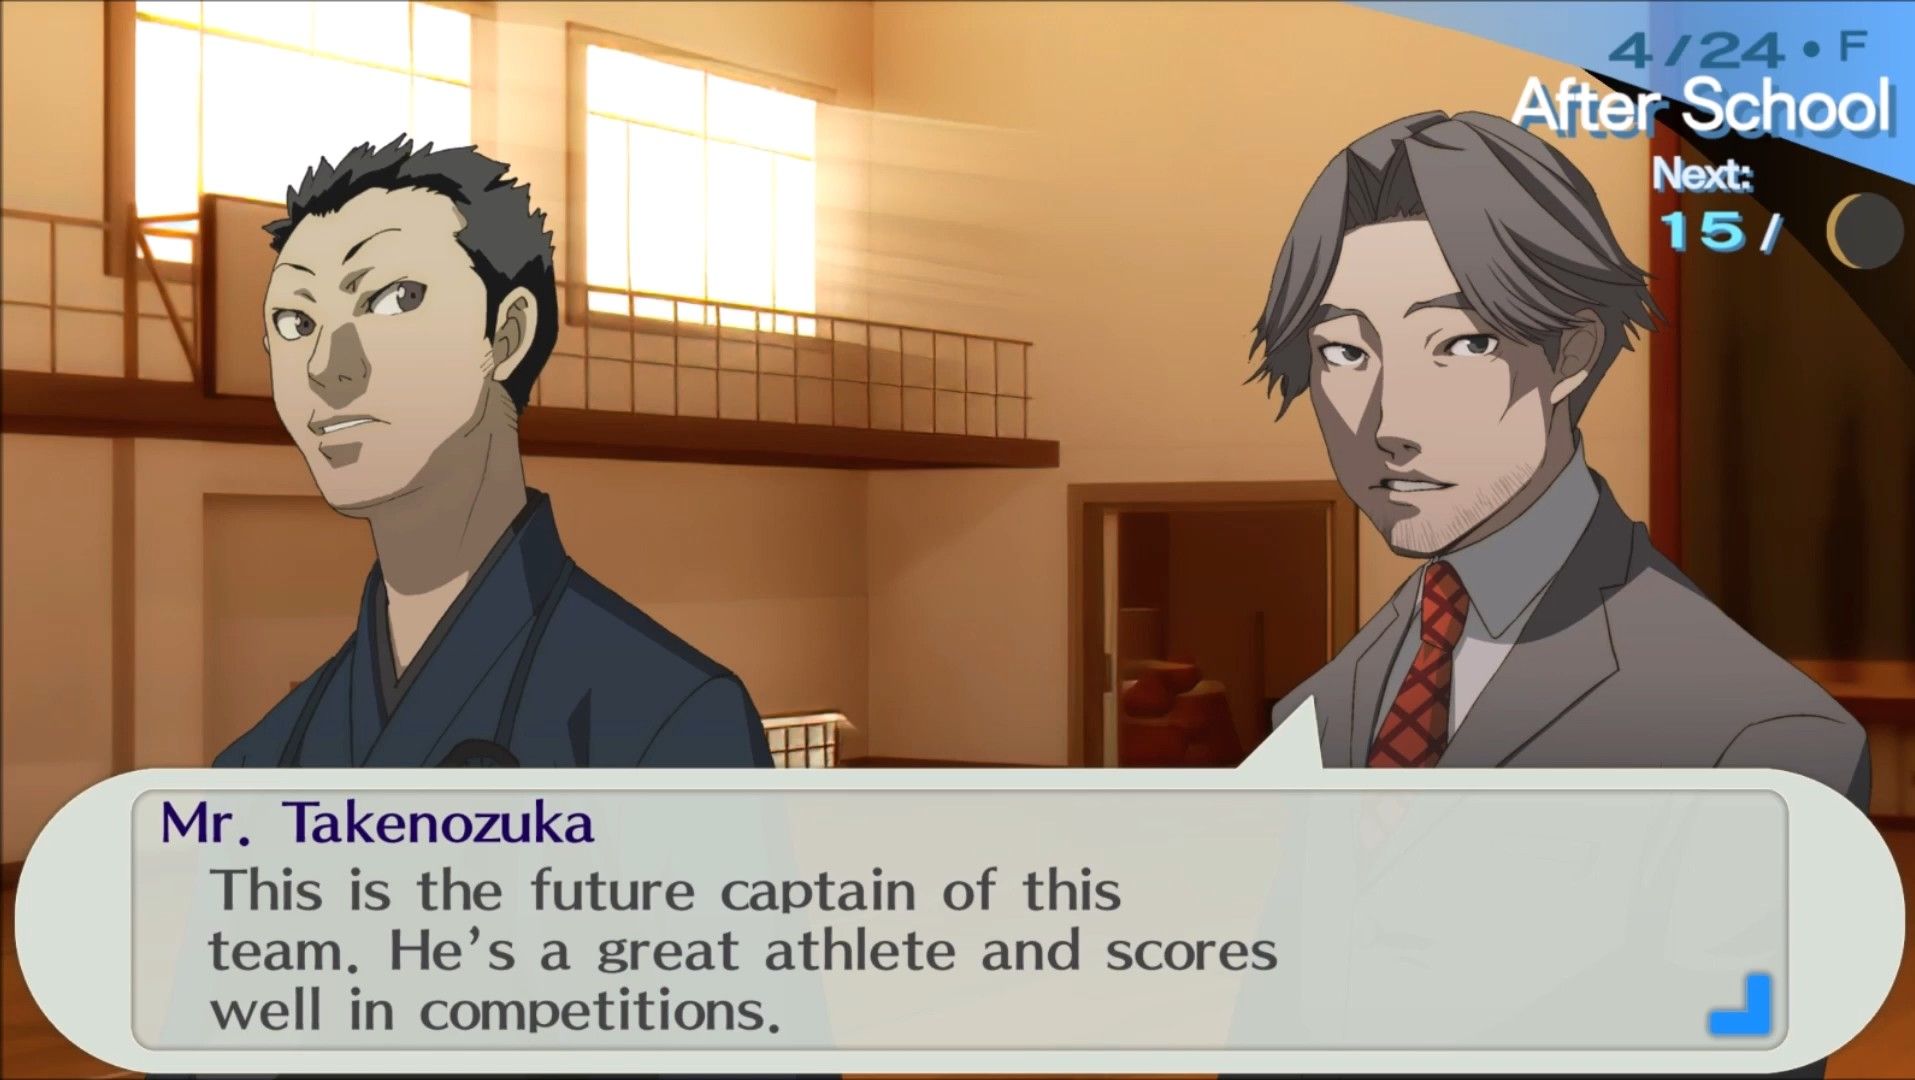 mr. takenozuka introducing kazushi to the male protagonist at kendo practice in persona 3 portable